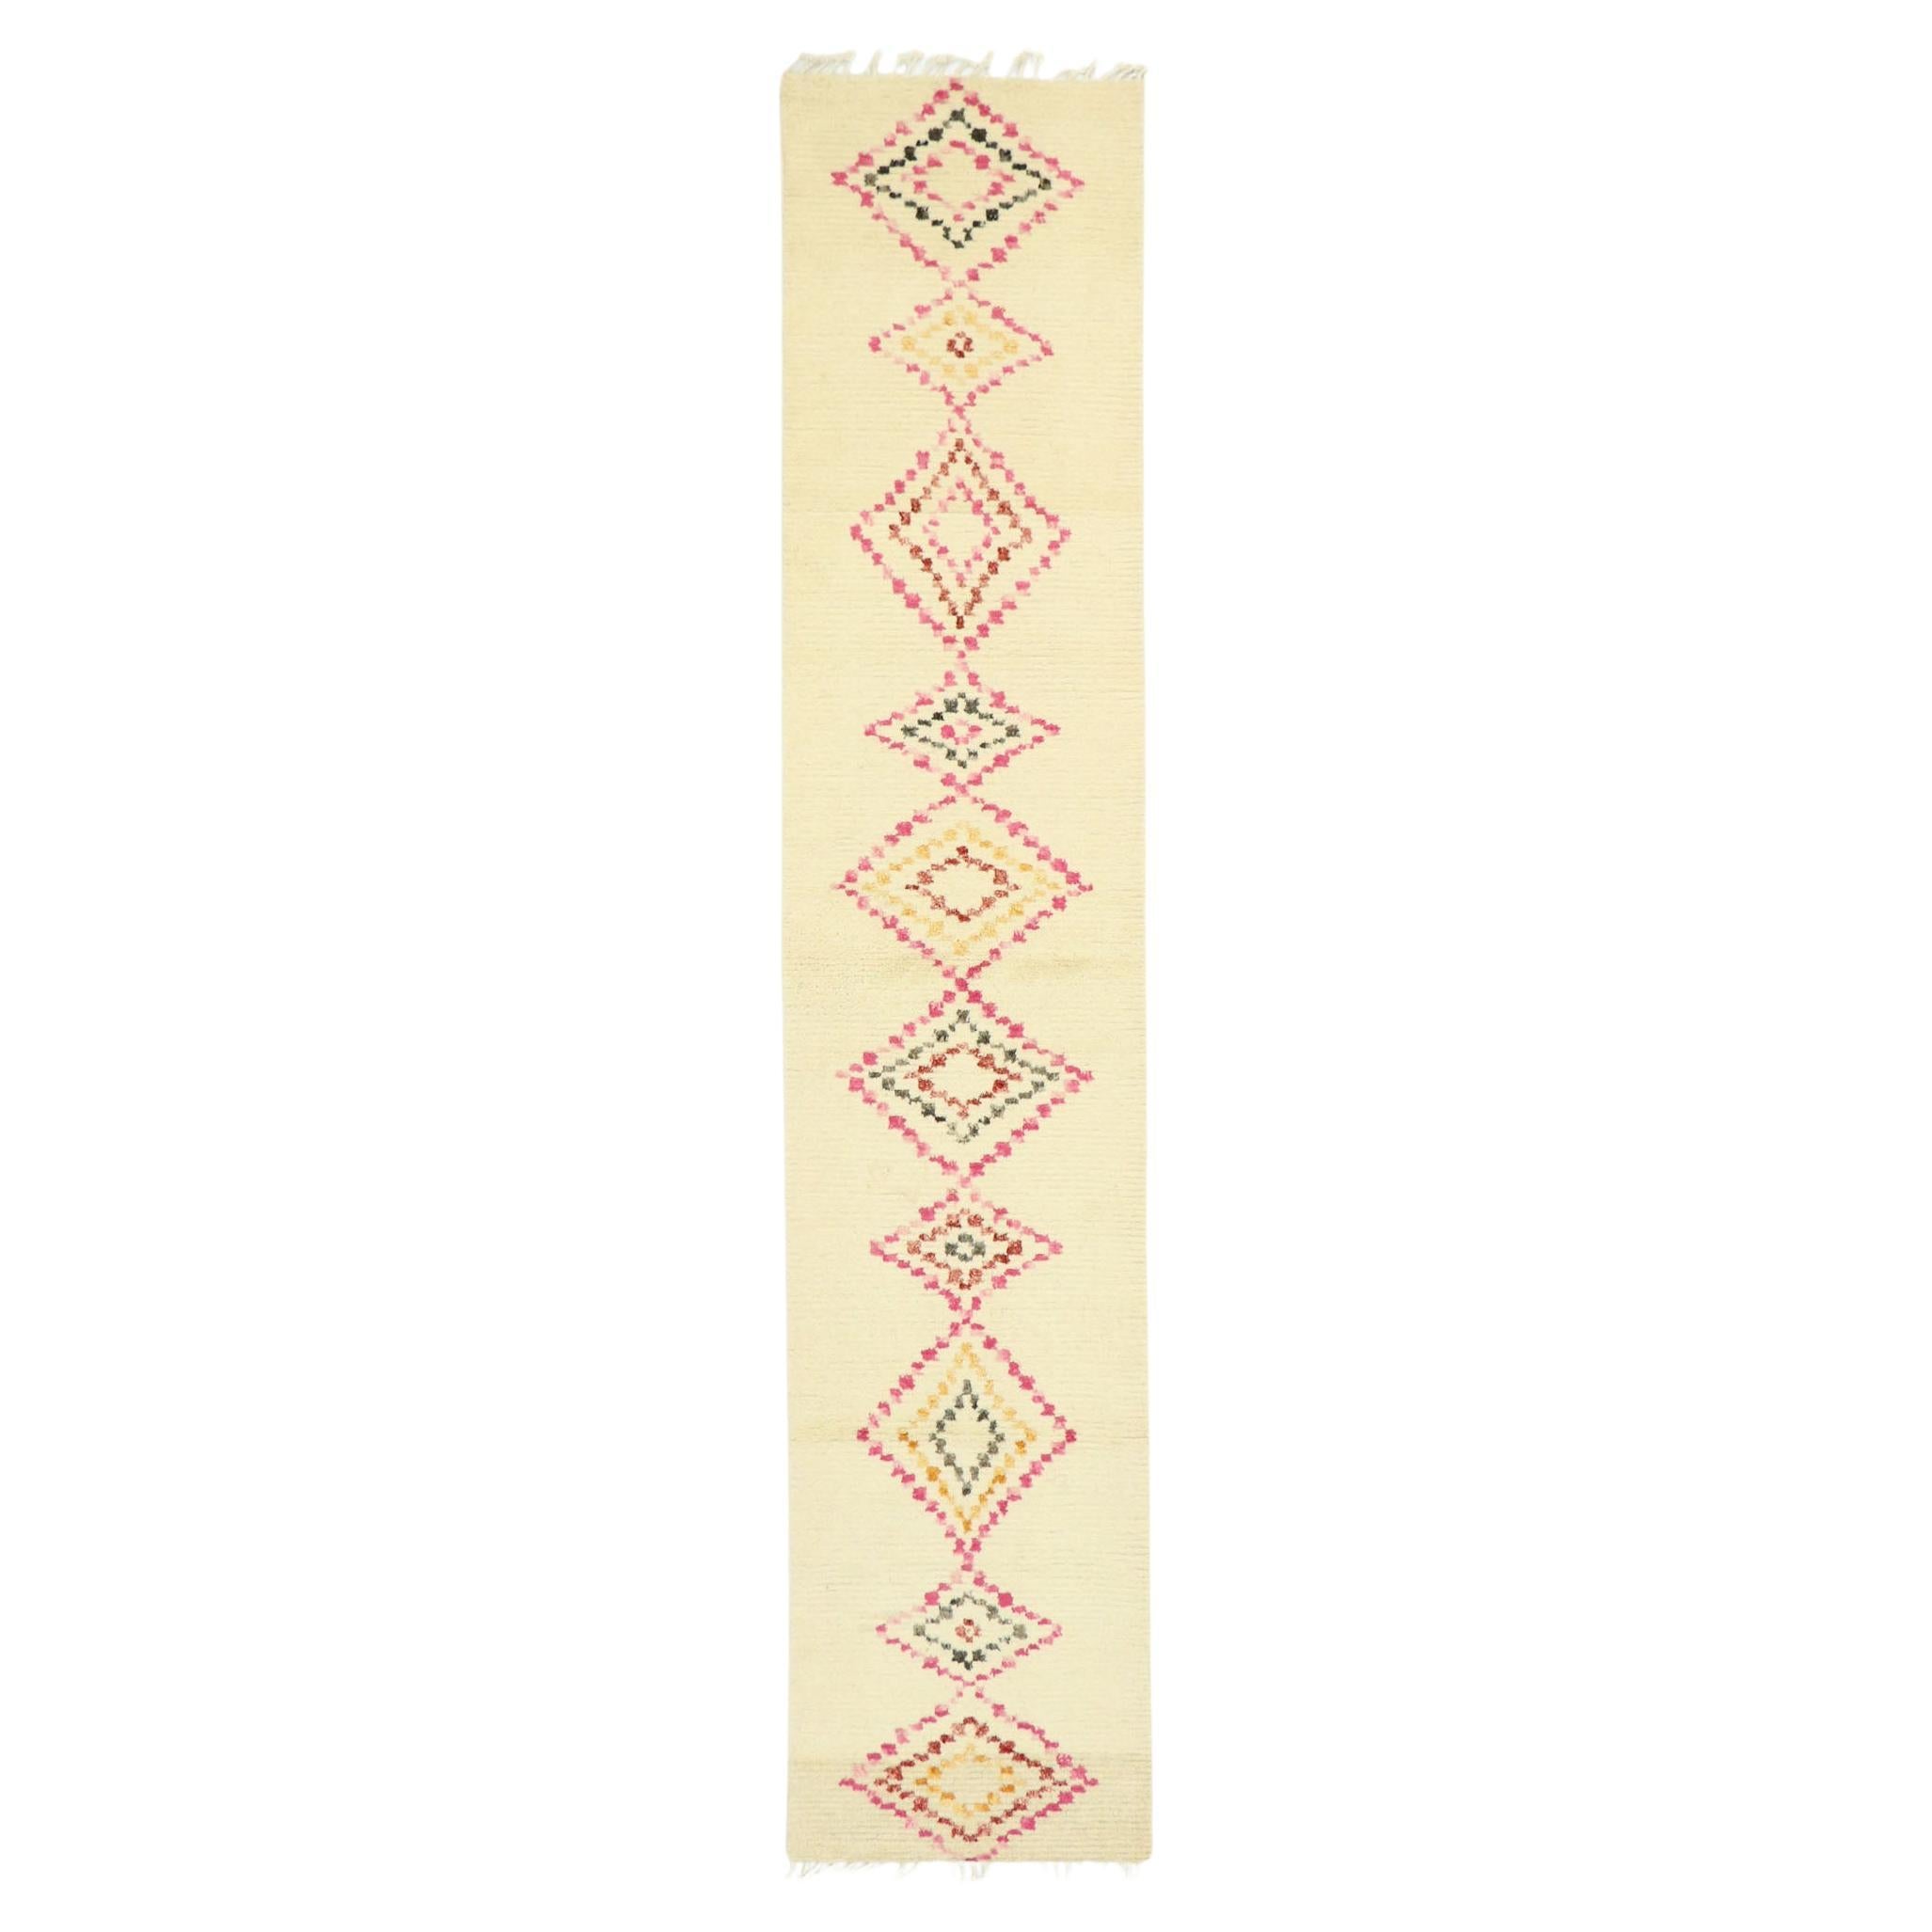 Colorful Moroccan Rug Runner, Boho Jungalow meets Southwest Desert Style